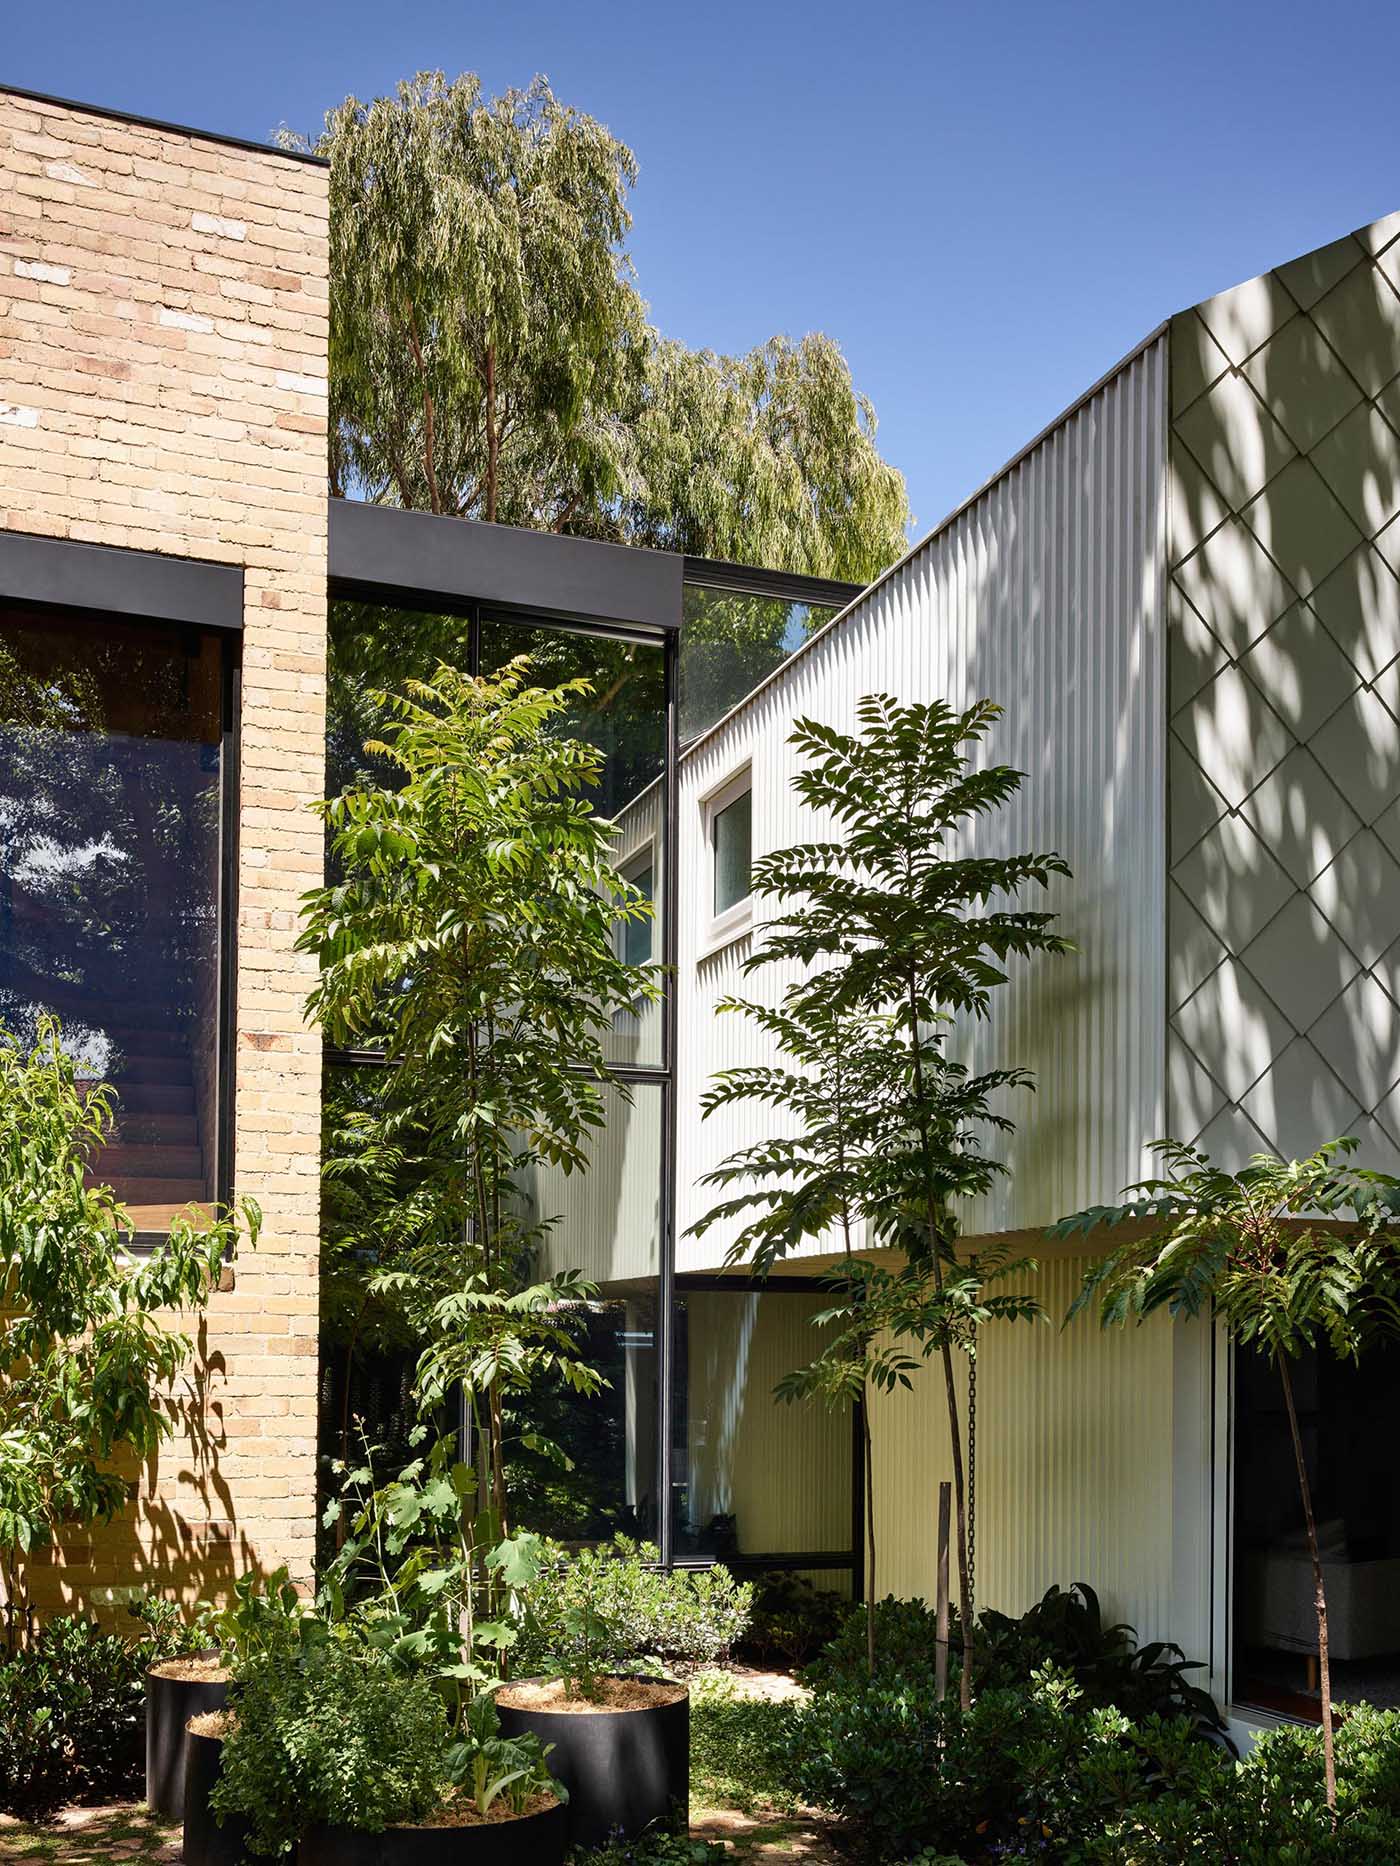 A modern home with indoor/outdoor living spaces, has been built using recycled yellow brick and metal shingles.